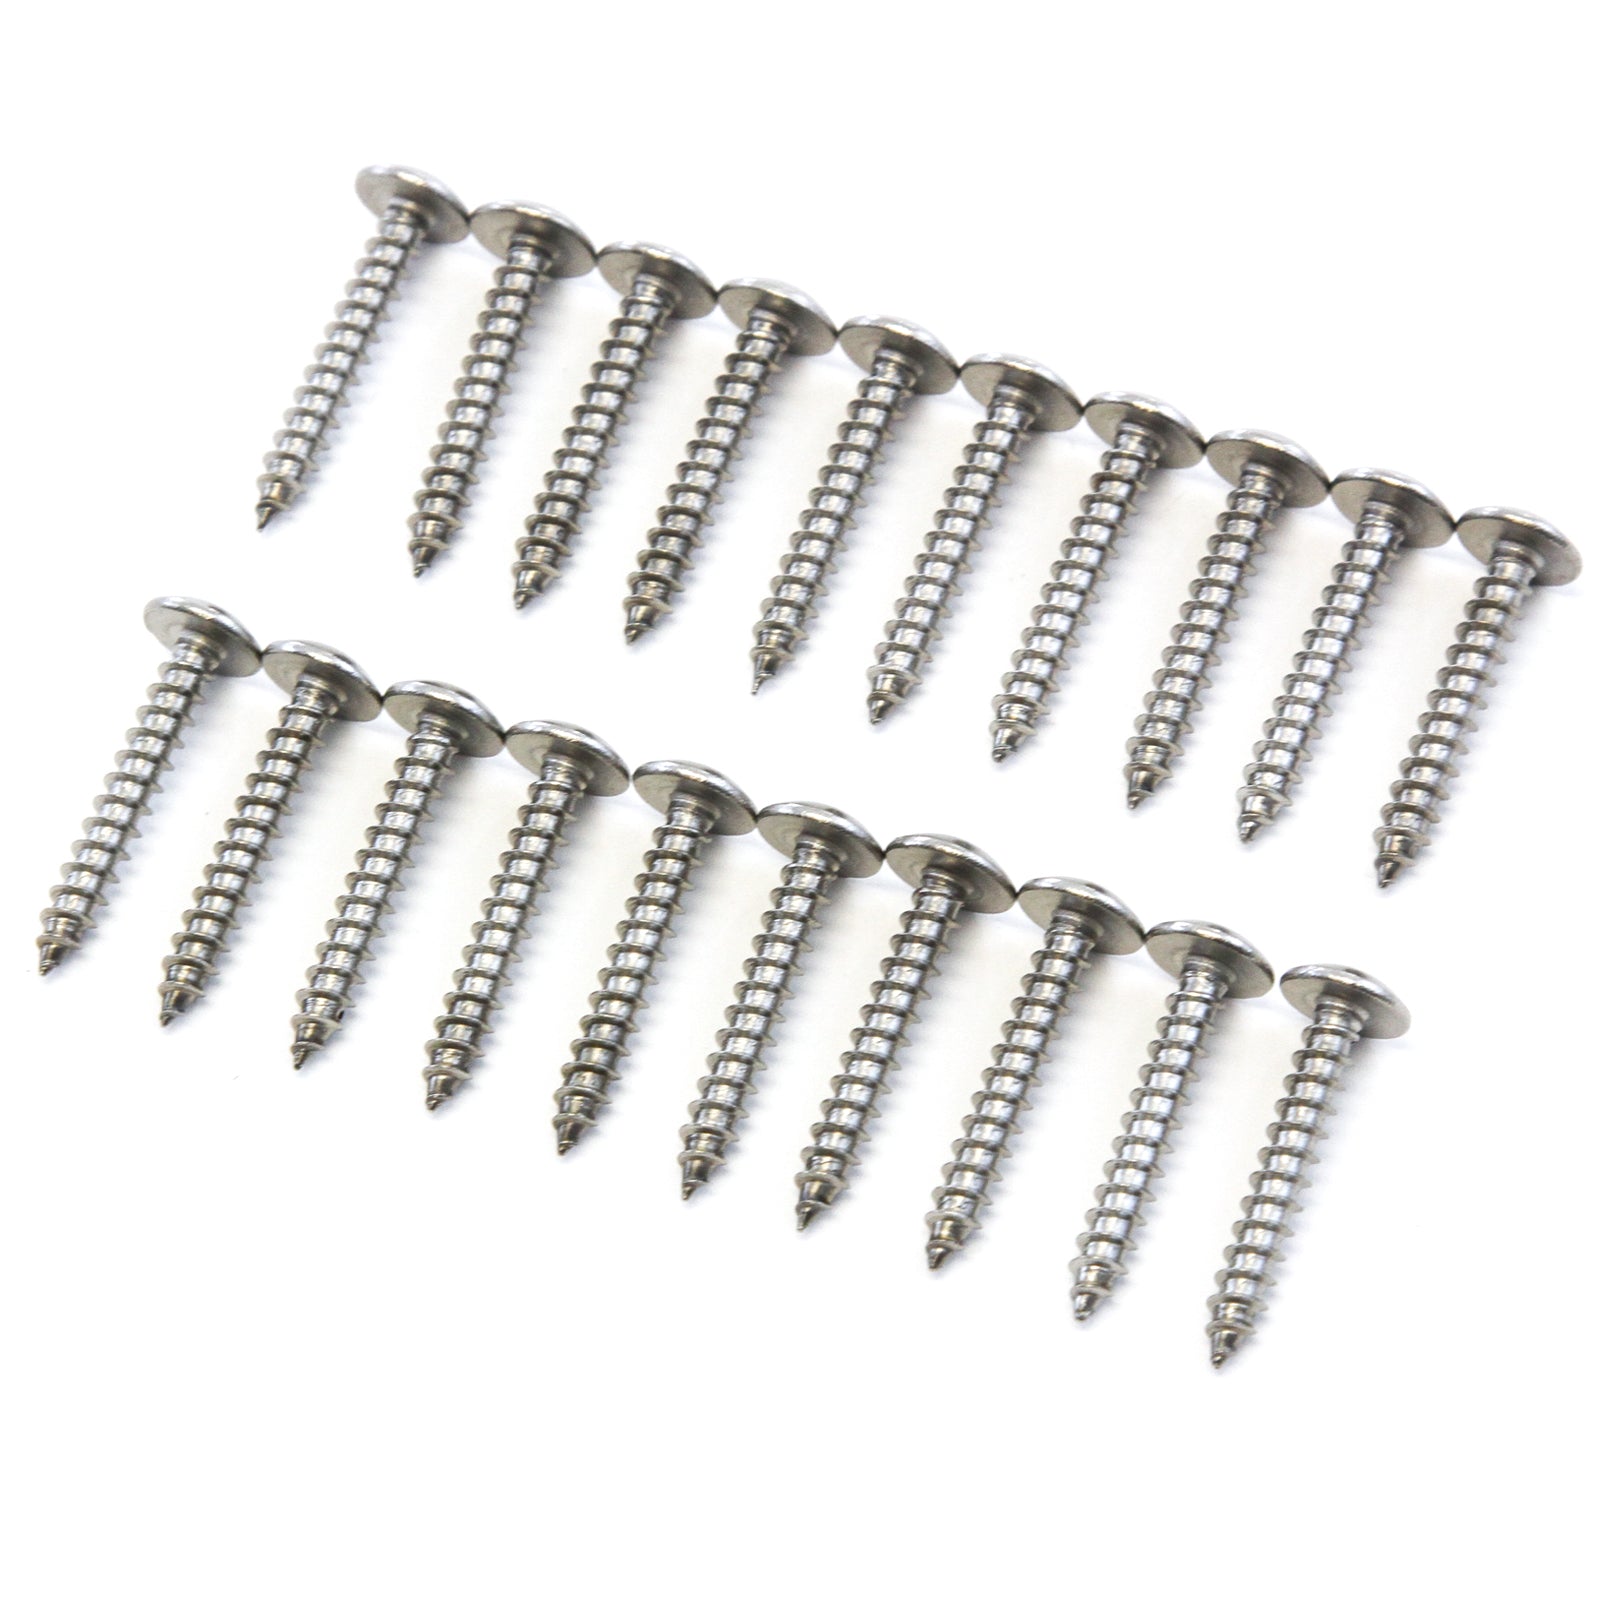 Red Hound Auto 20 Piece Pan Head Screw Set for Dock Bumper Installation Marine Grade Stainless Steel 10 x 1-1/4 Inches SS